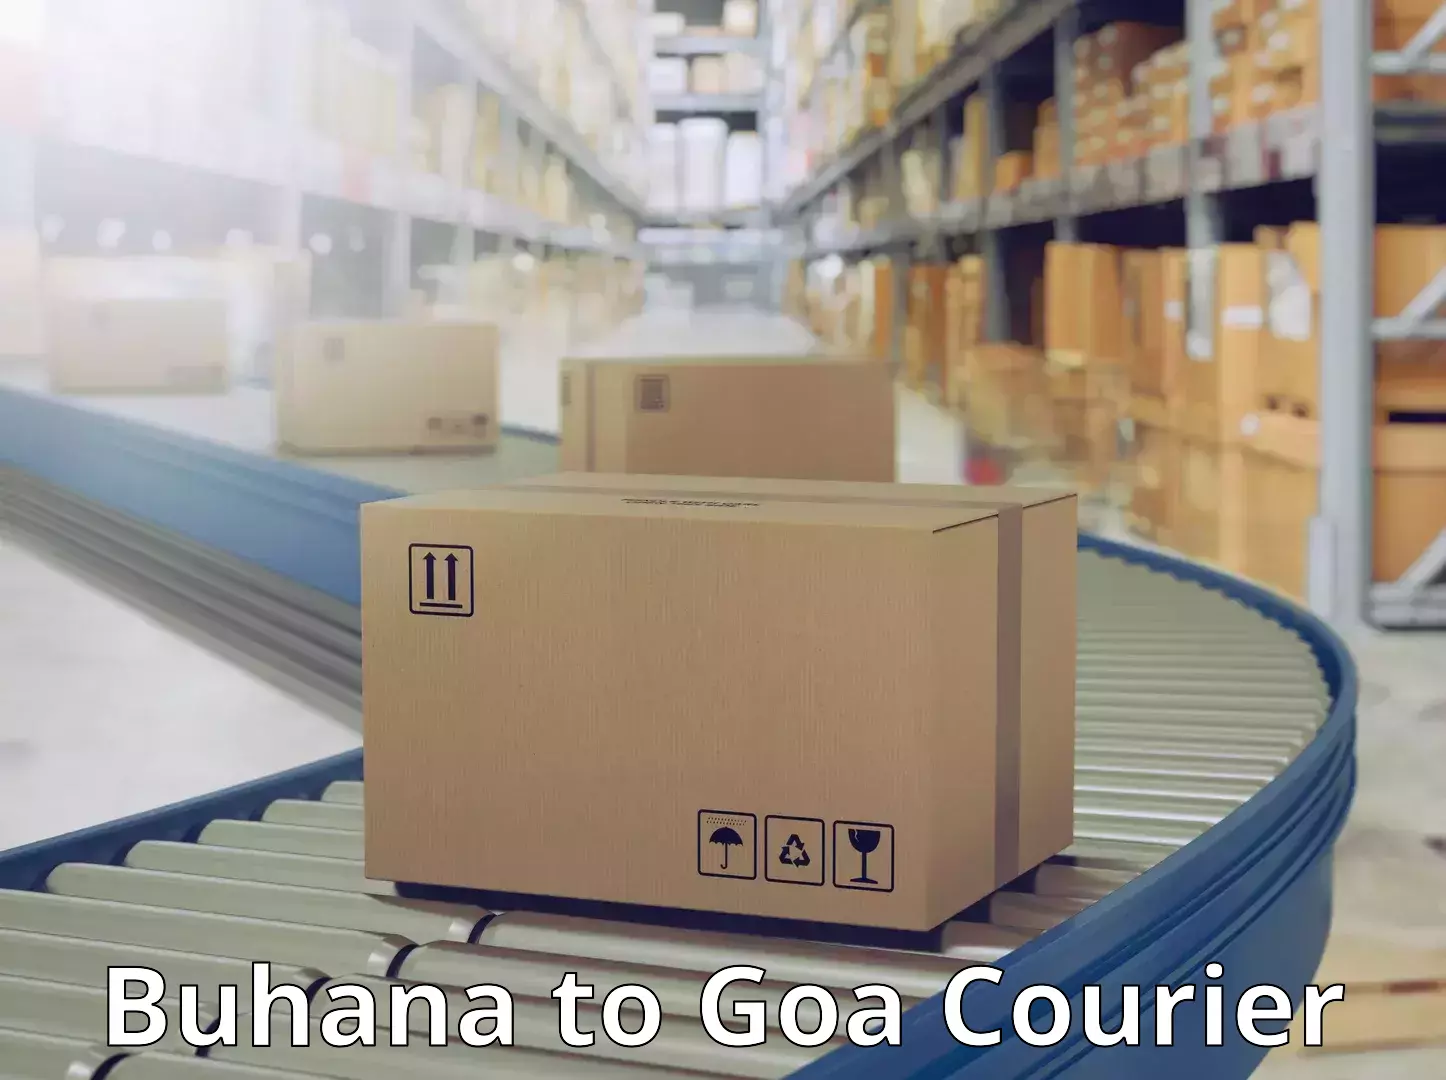 Round-the-clock parcel delivery Buhana to Goa